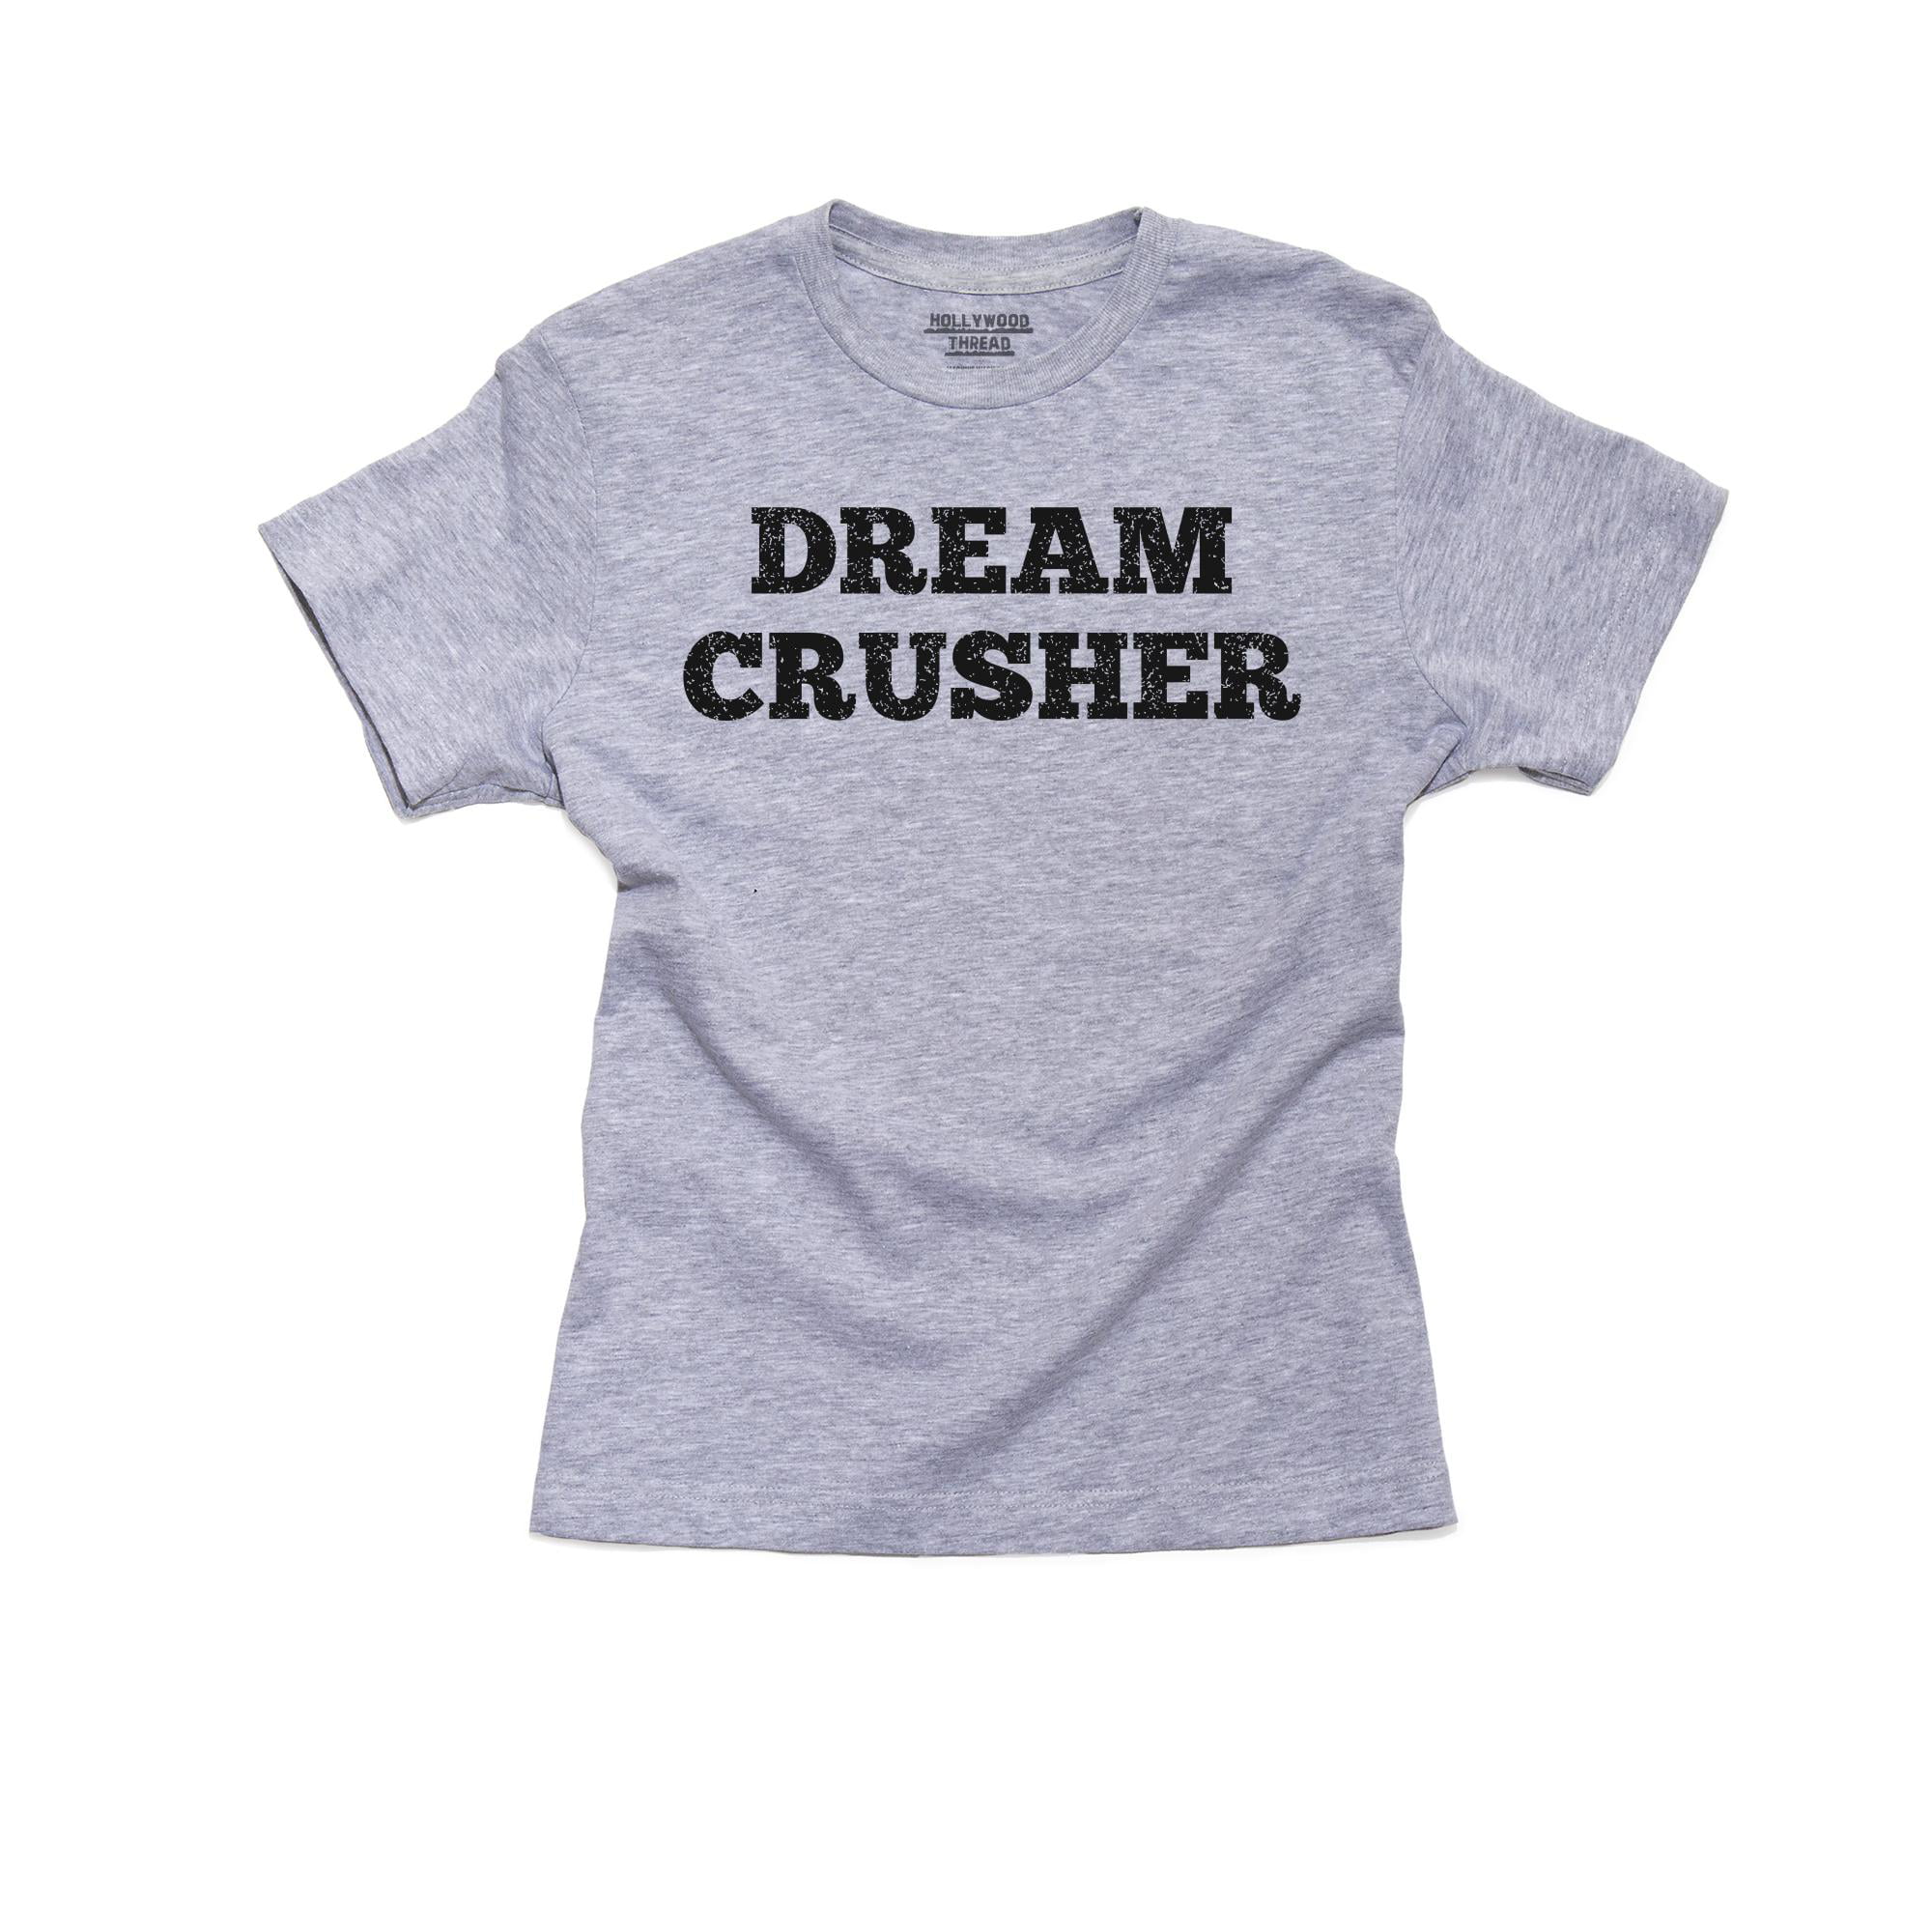 Dream Crusher - Vintage Funny Large Print Boy's Cotton Youth T-Shirt